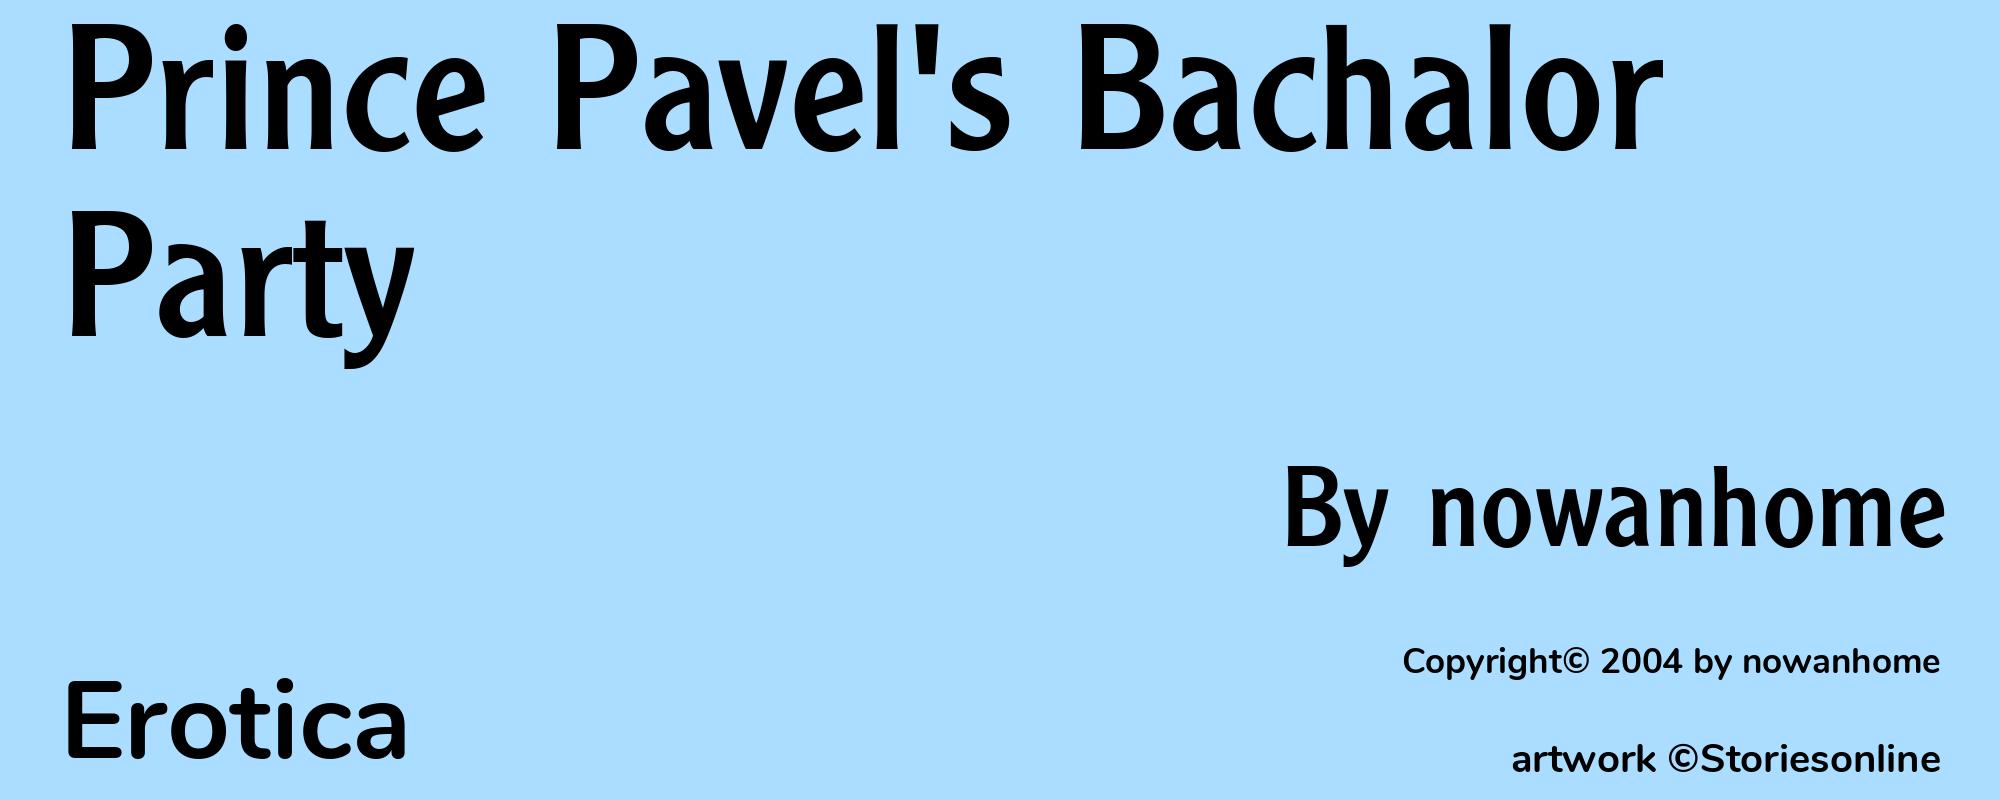 Prince Pavel's Bachalor Party - Cover